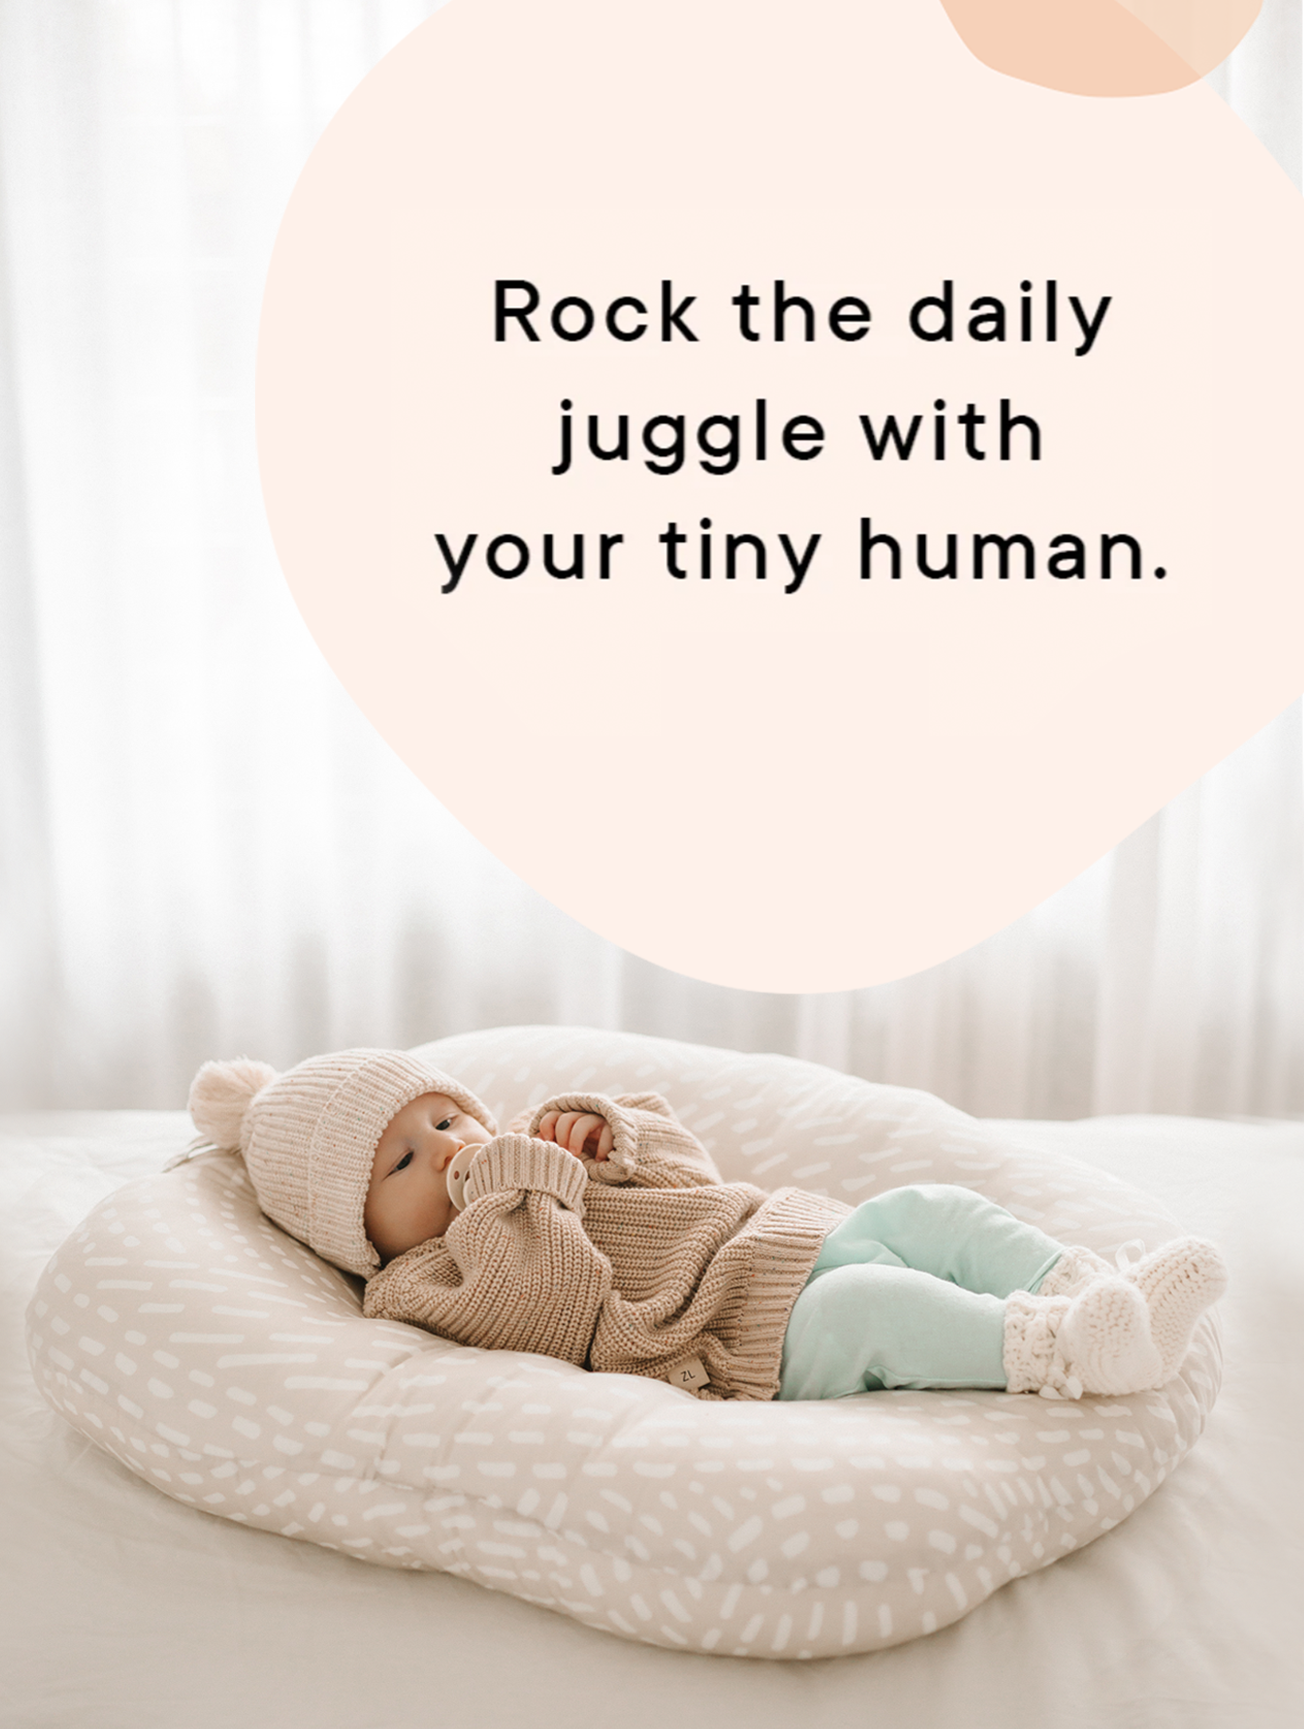 cushii lounger - lightweight and portable baby lounger